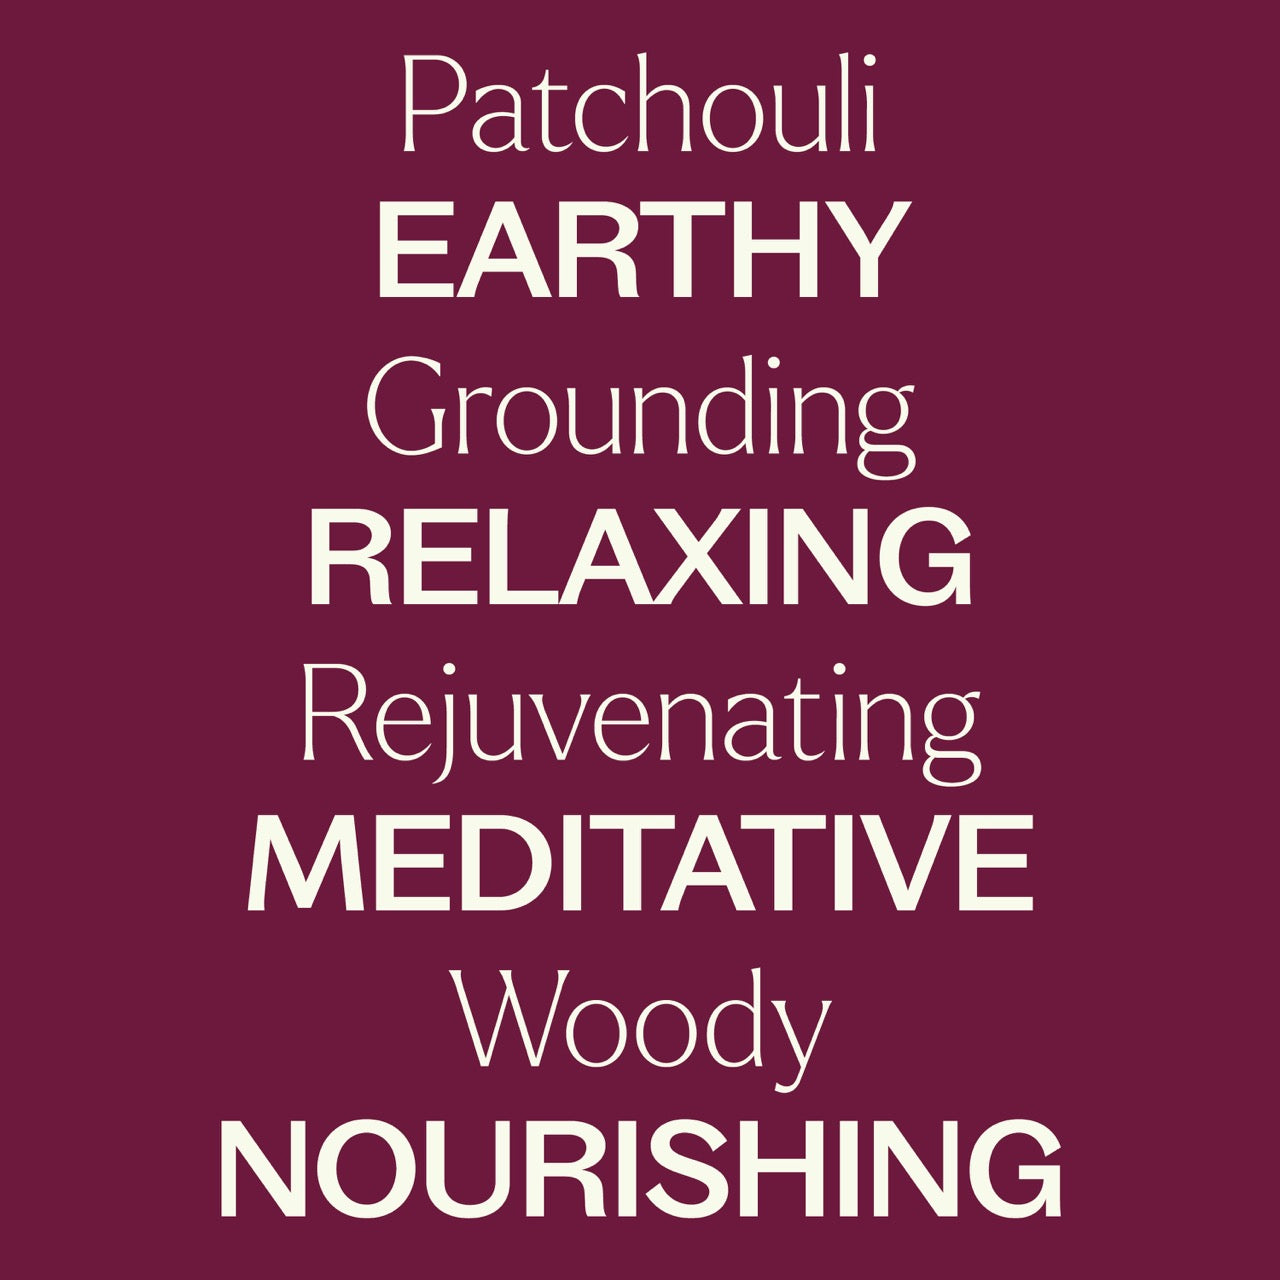 Patchouli Essential Oil Pre-Diluted Roll-On Key Features: earthy, grounding, relaxing, rejuvenating, meditative, woody, nourishing